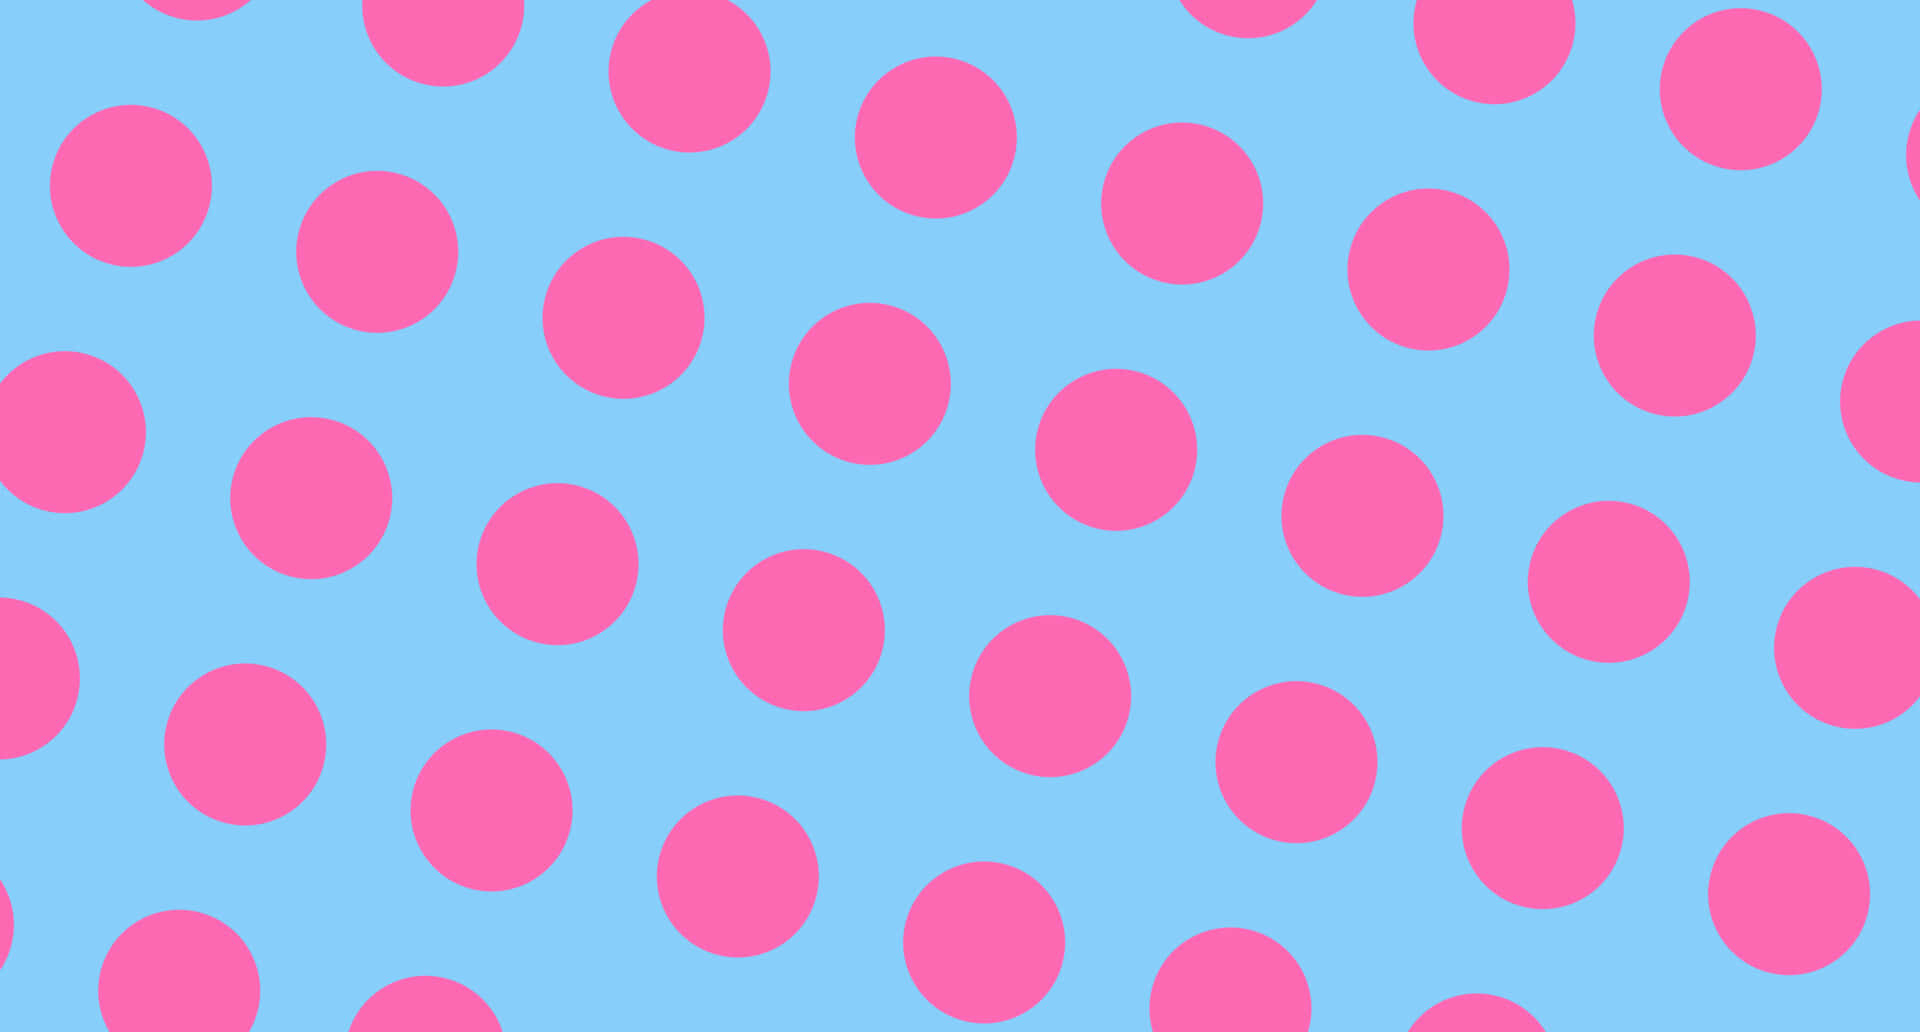 Add a pop of color with this vibrant pink polka dot pattern!